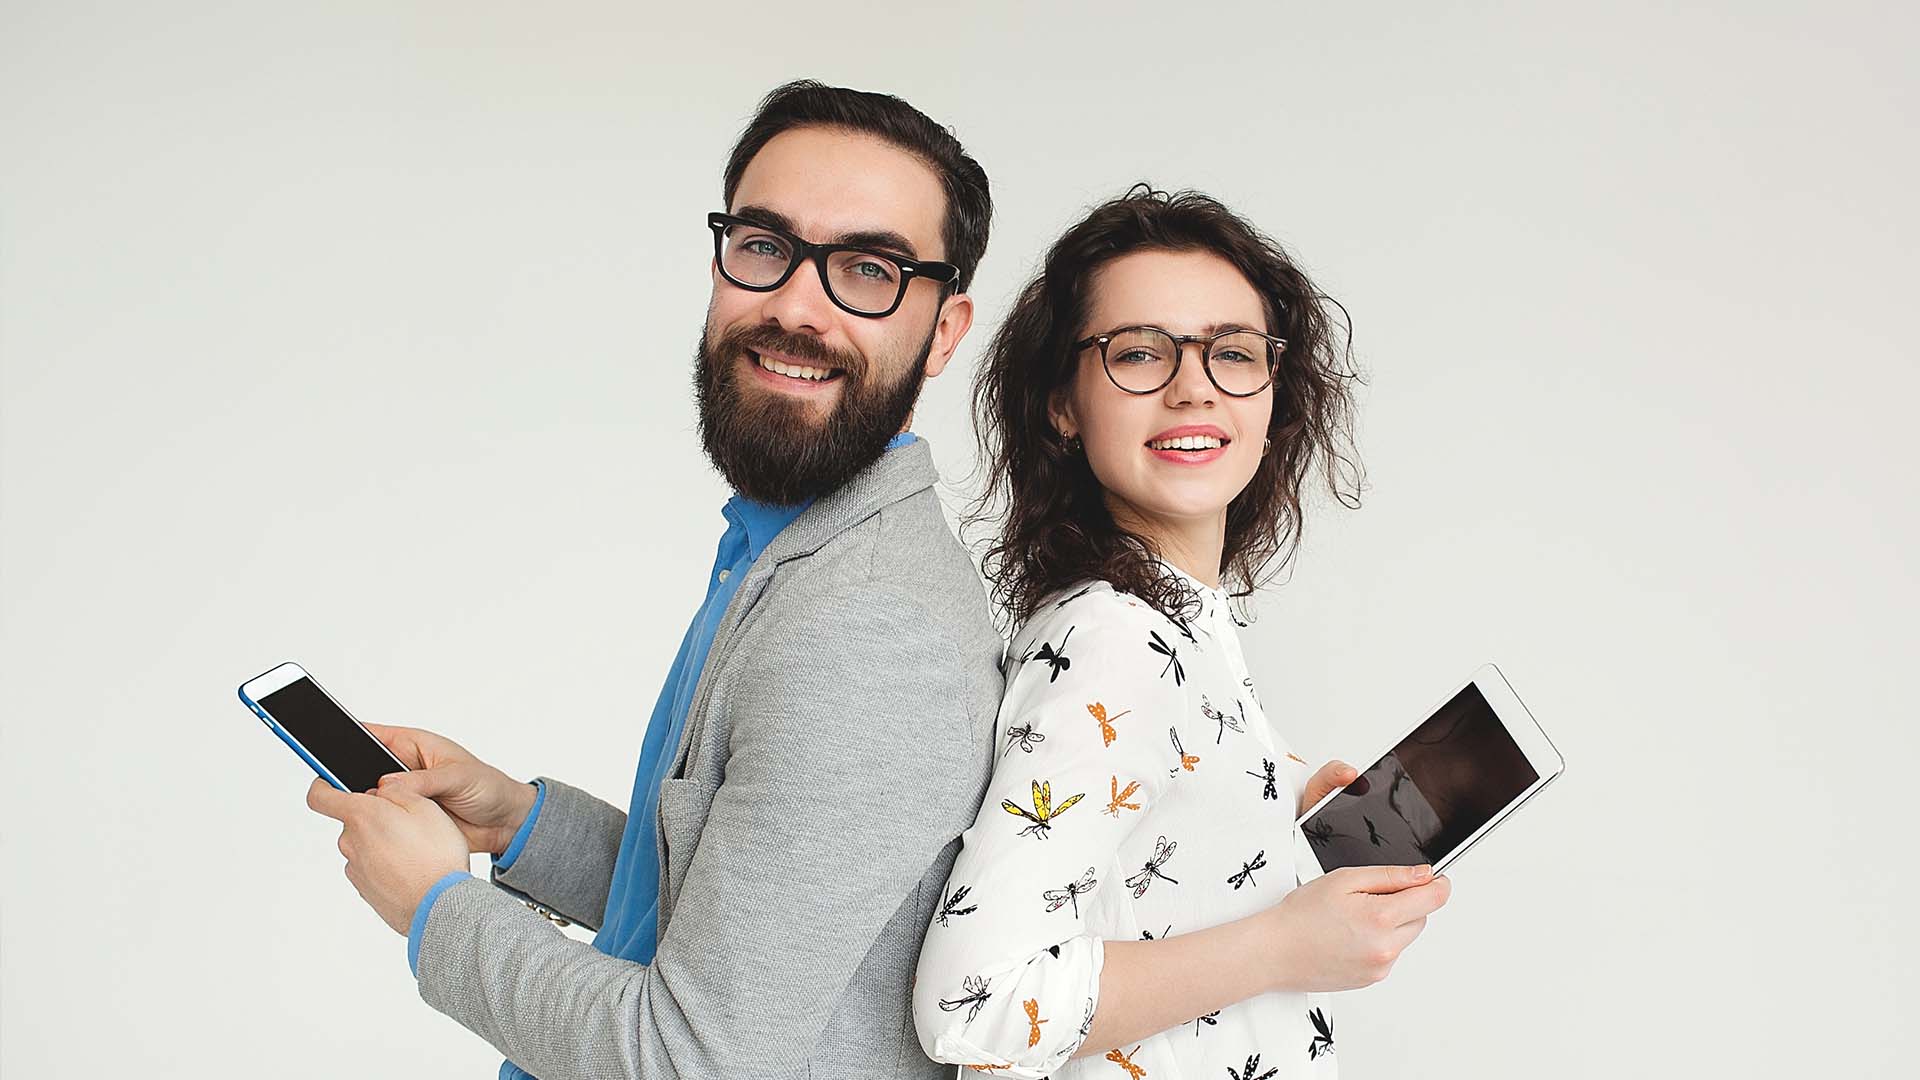 Brunette man and woman in glasses and professional clothing standing back to back to each other and holding tablets.